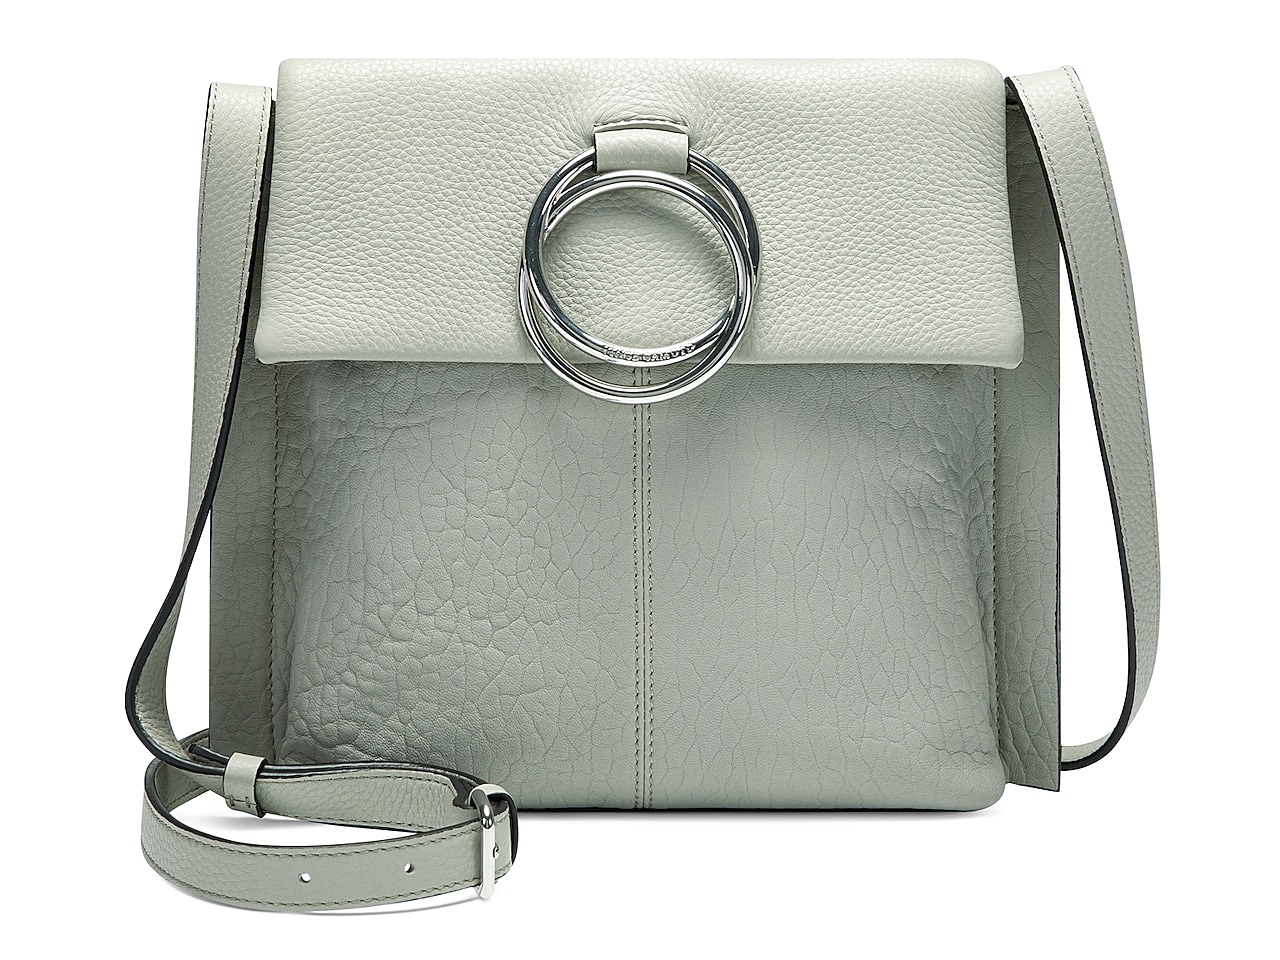 Vince Camuto Livy Leather Crossbody Bag | DSW